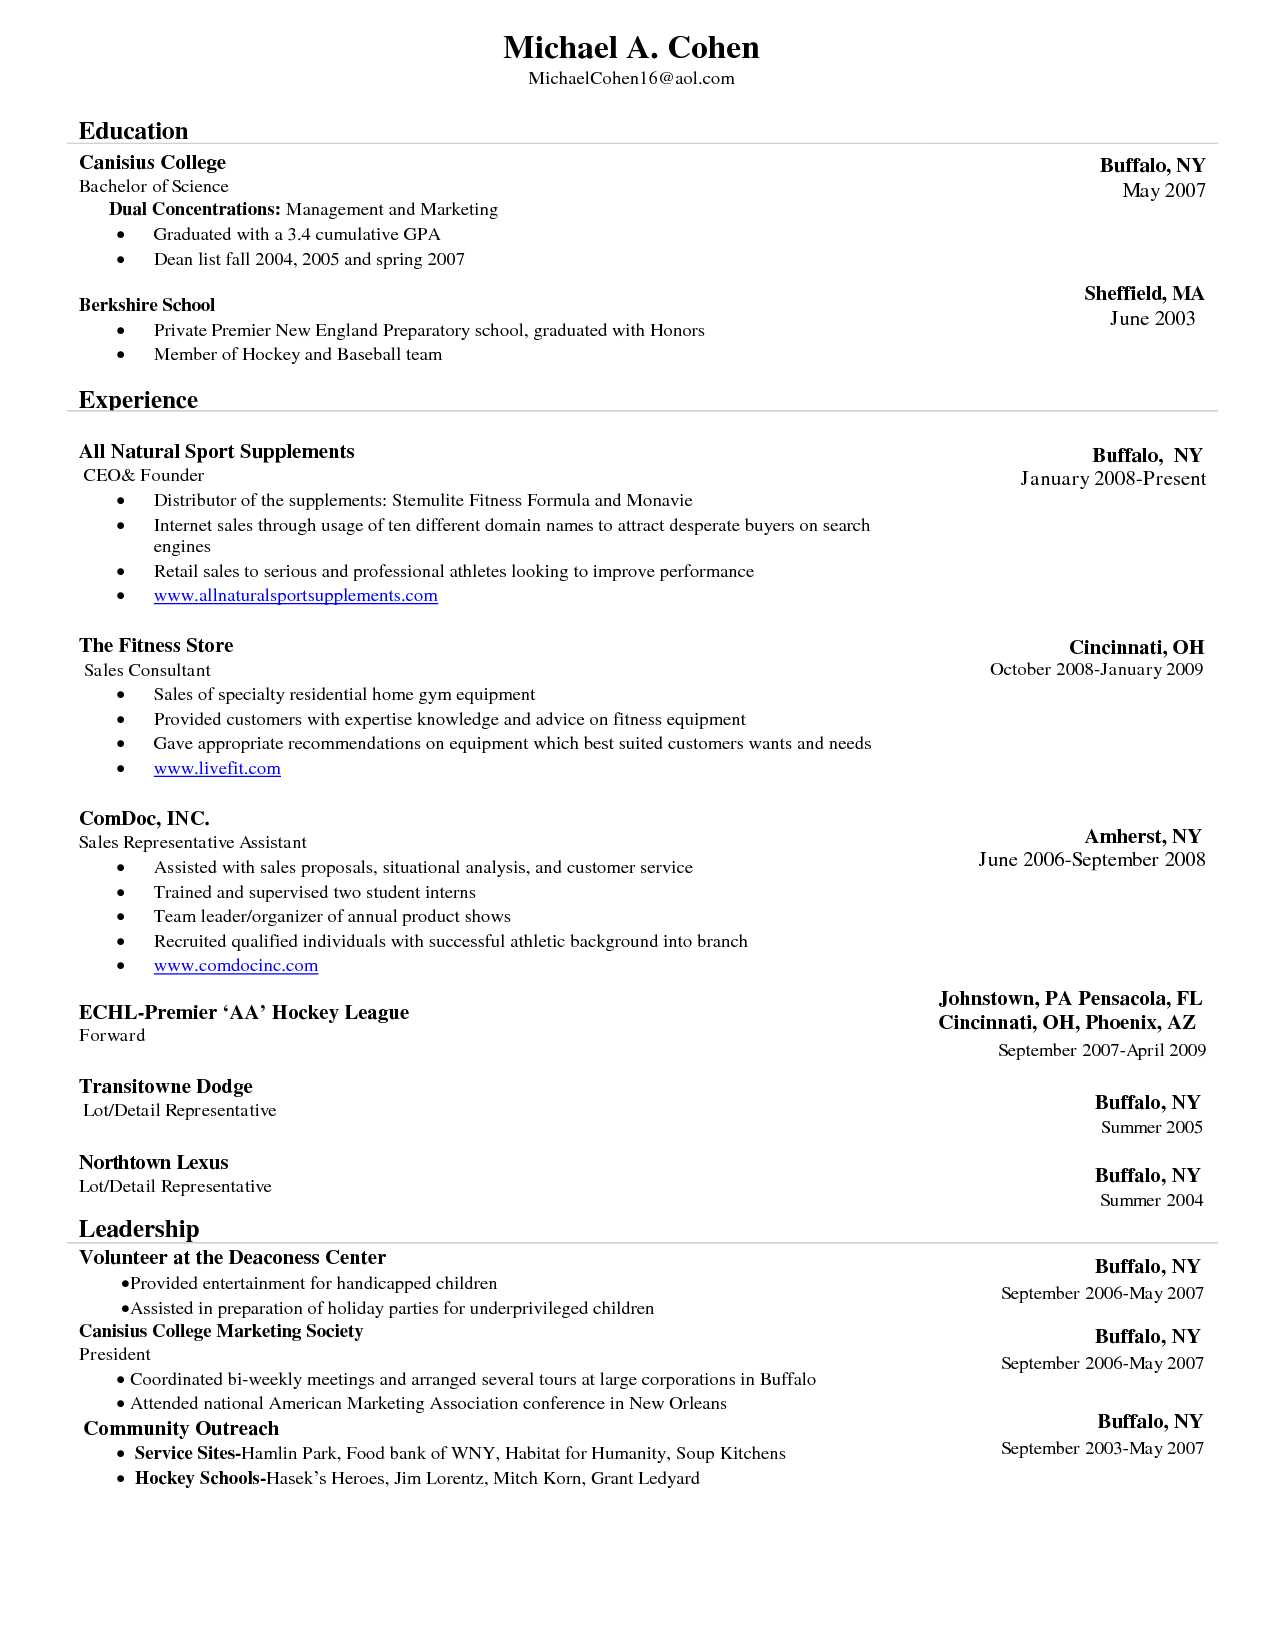 Brilliant Resume Format Microsoft Word – Trend Design Models Intended For Resume Templates Word 2013